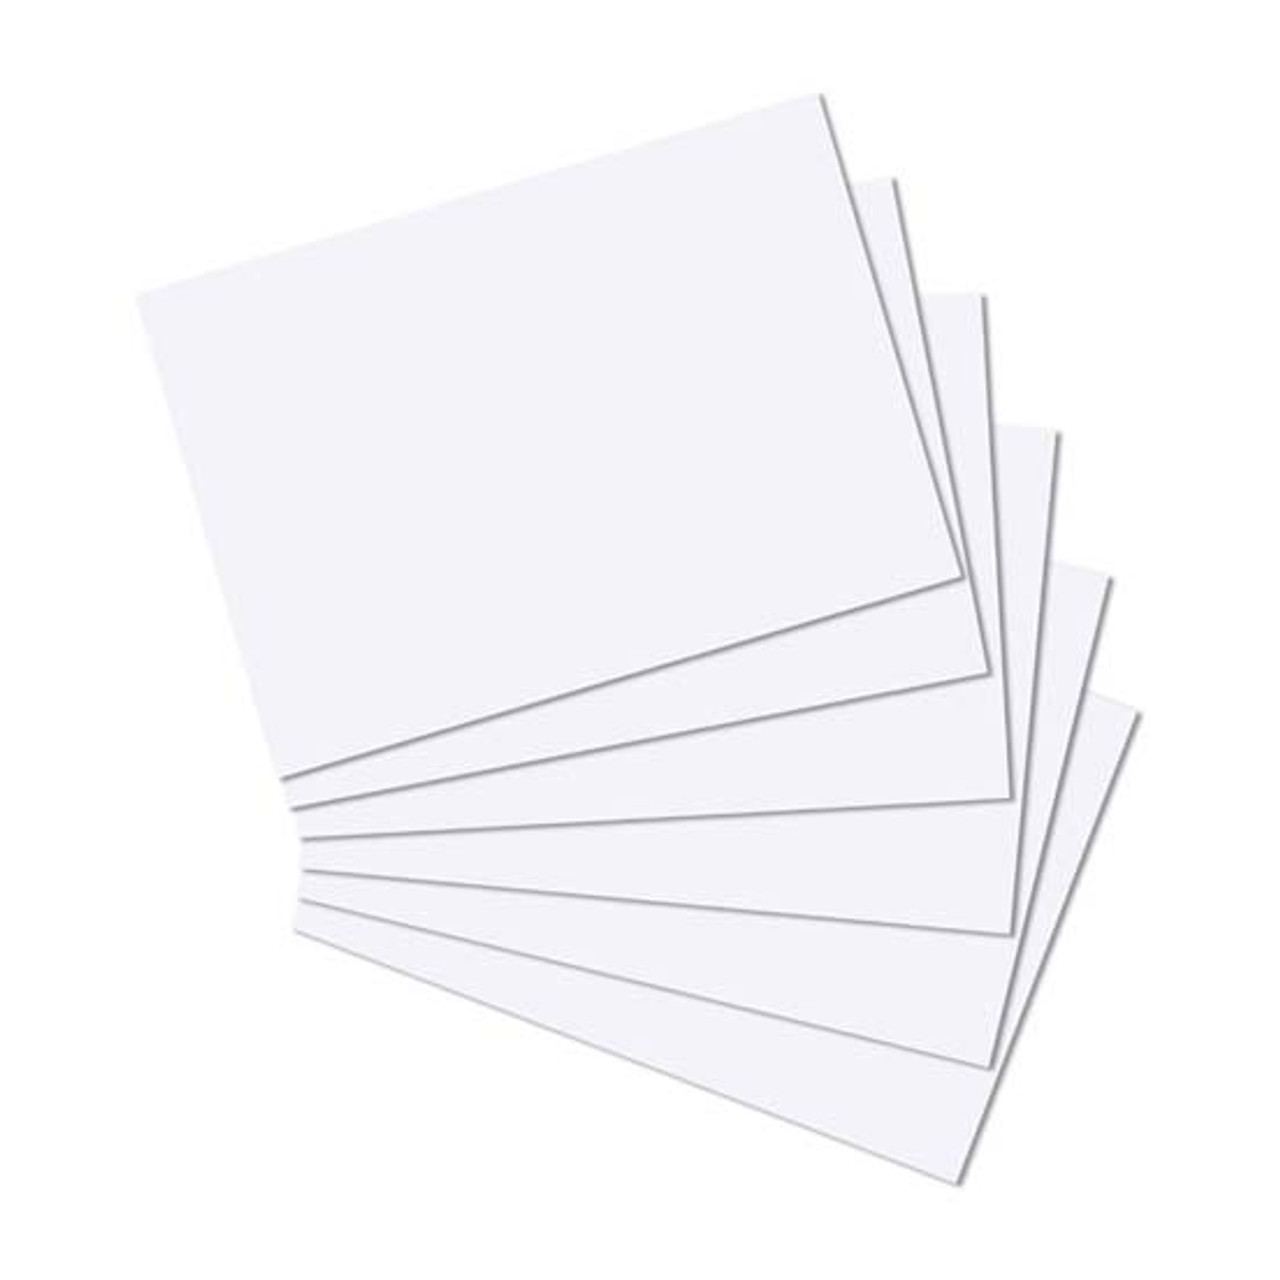 White blank pricing cards 165 x 75 mm - Box of 1000